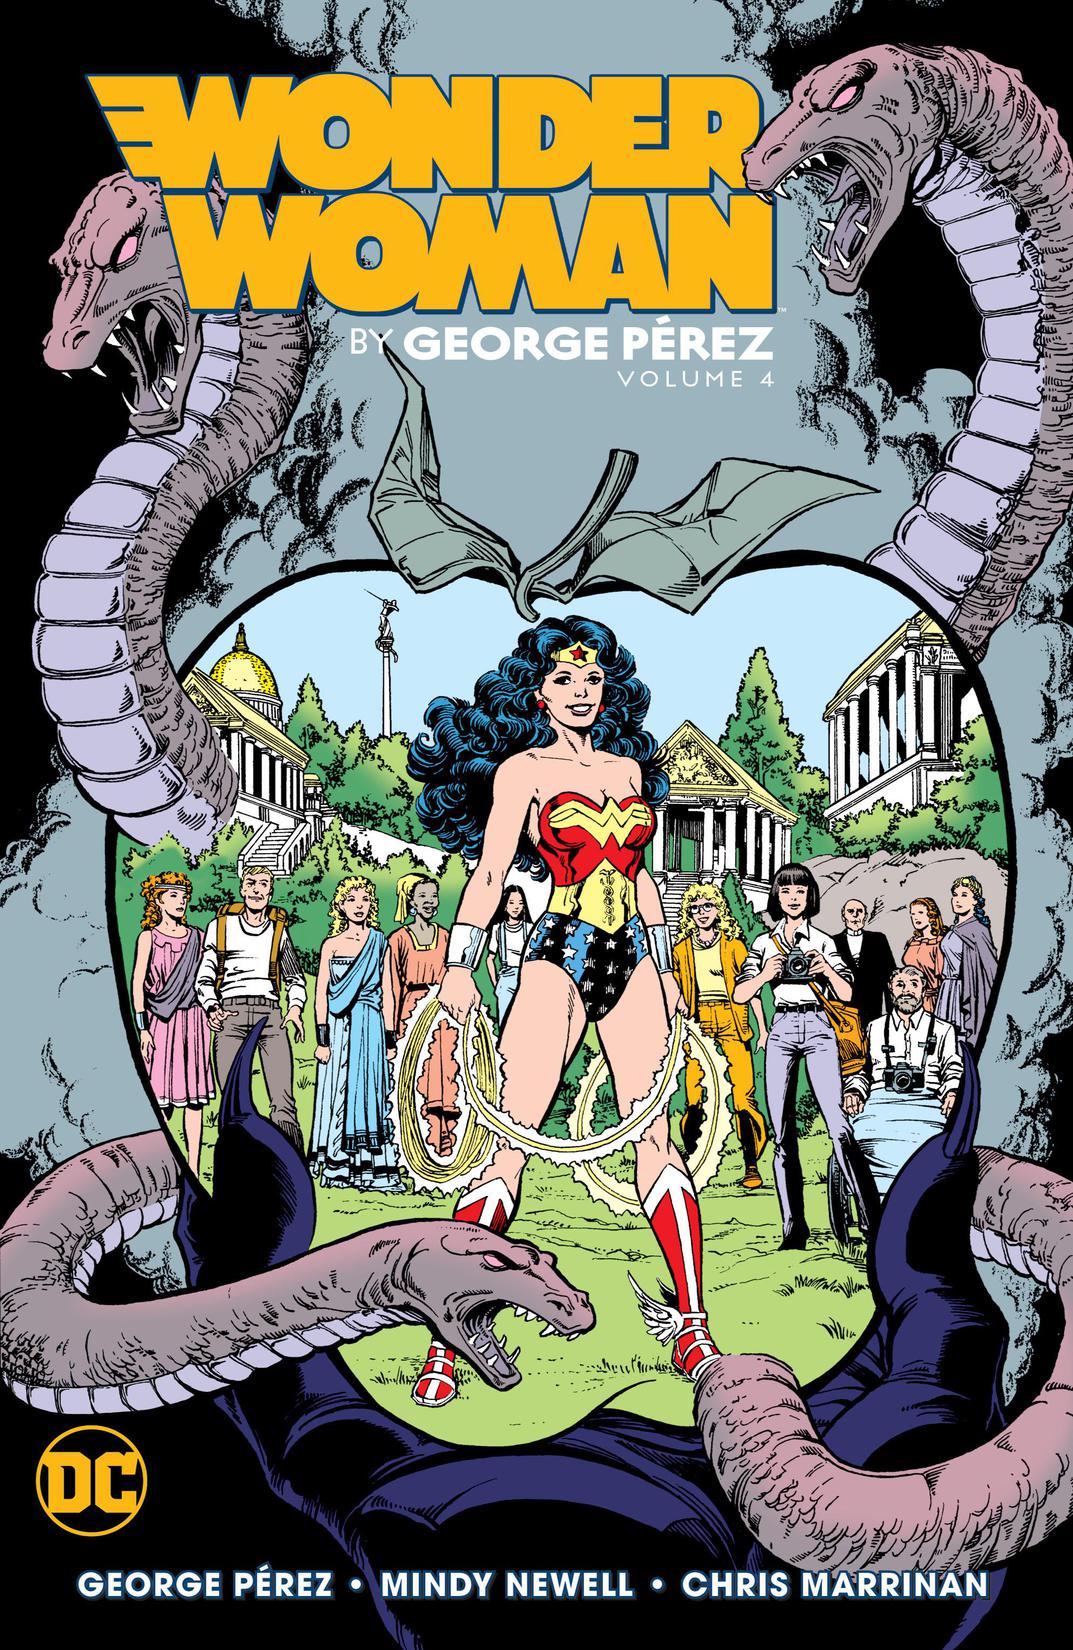 Wonder Woman by George Perez Vol. 4 preview images